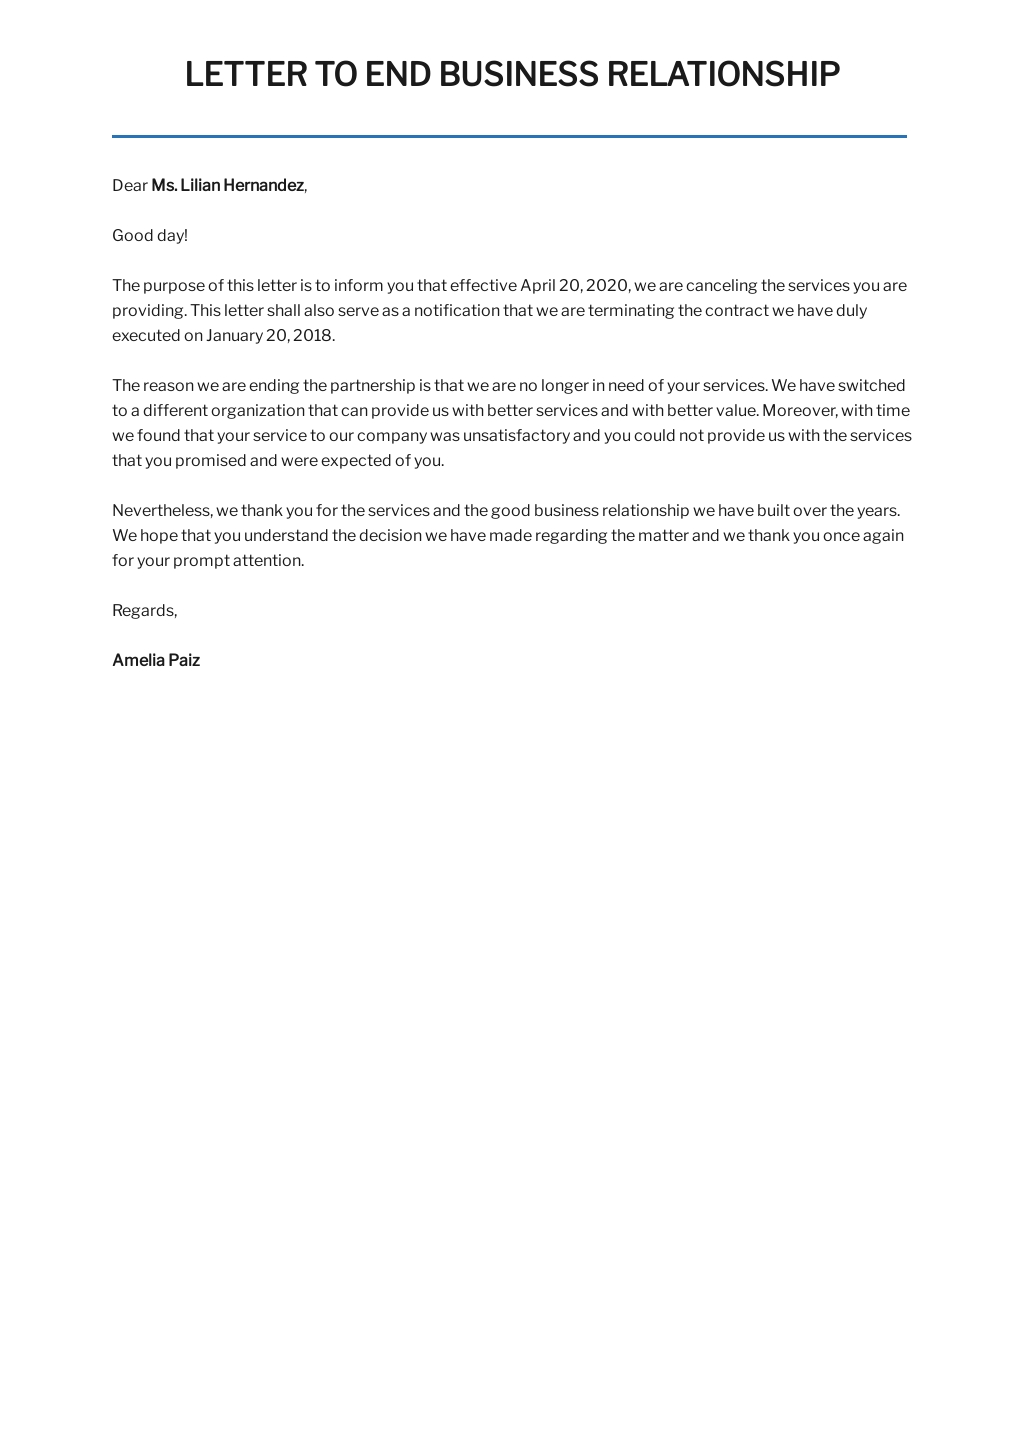 Free Letter To End Business Relationship Template.jpe